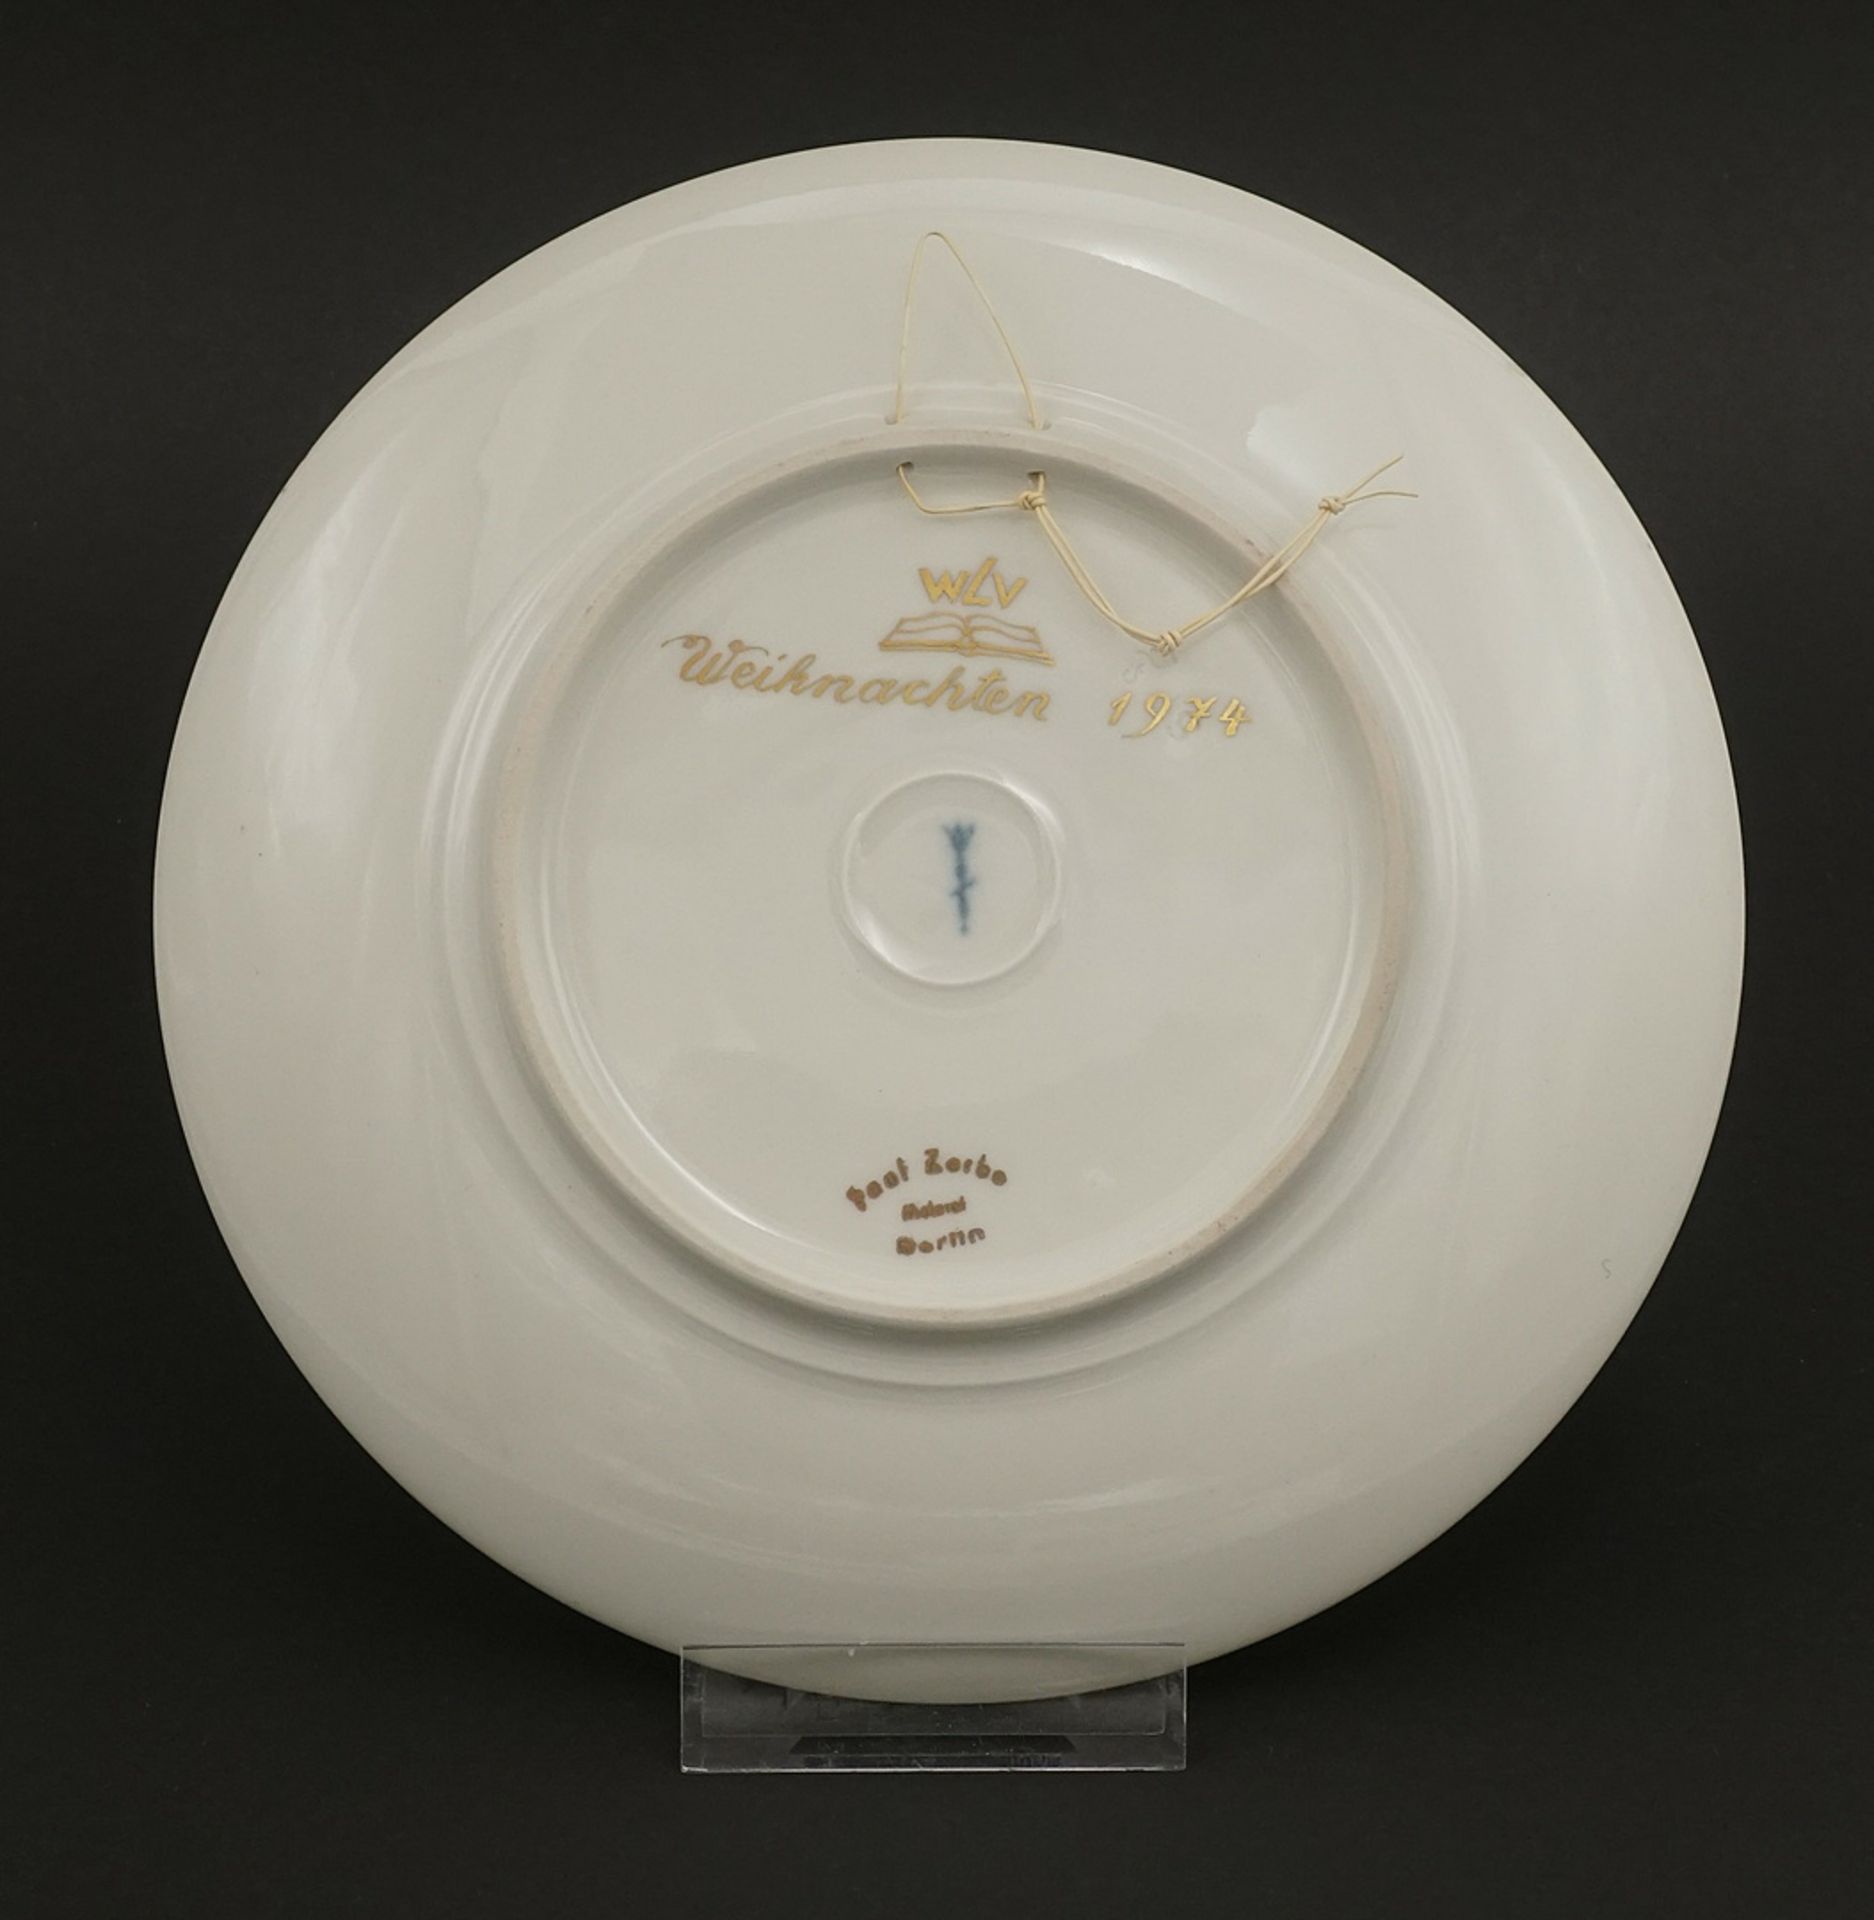 Two KPM Berlin plates and one leaf bowl, Paul Zerbe - Image 5 of 7